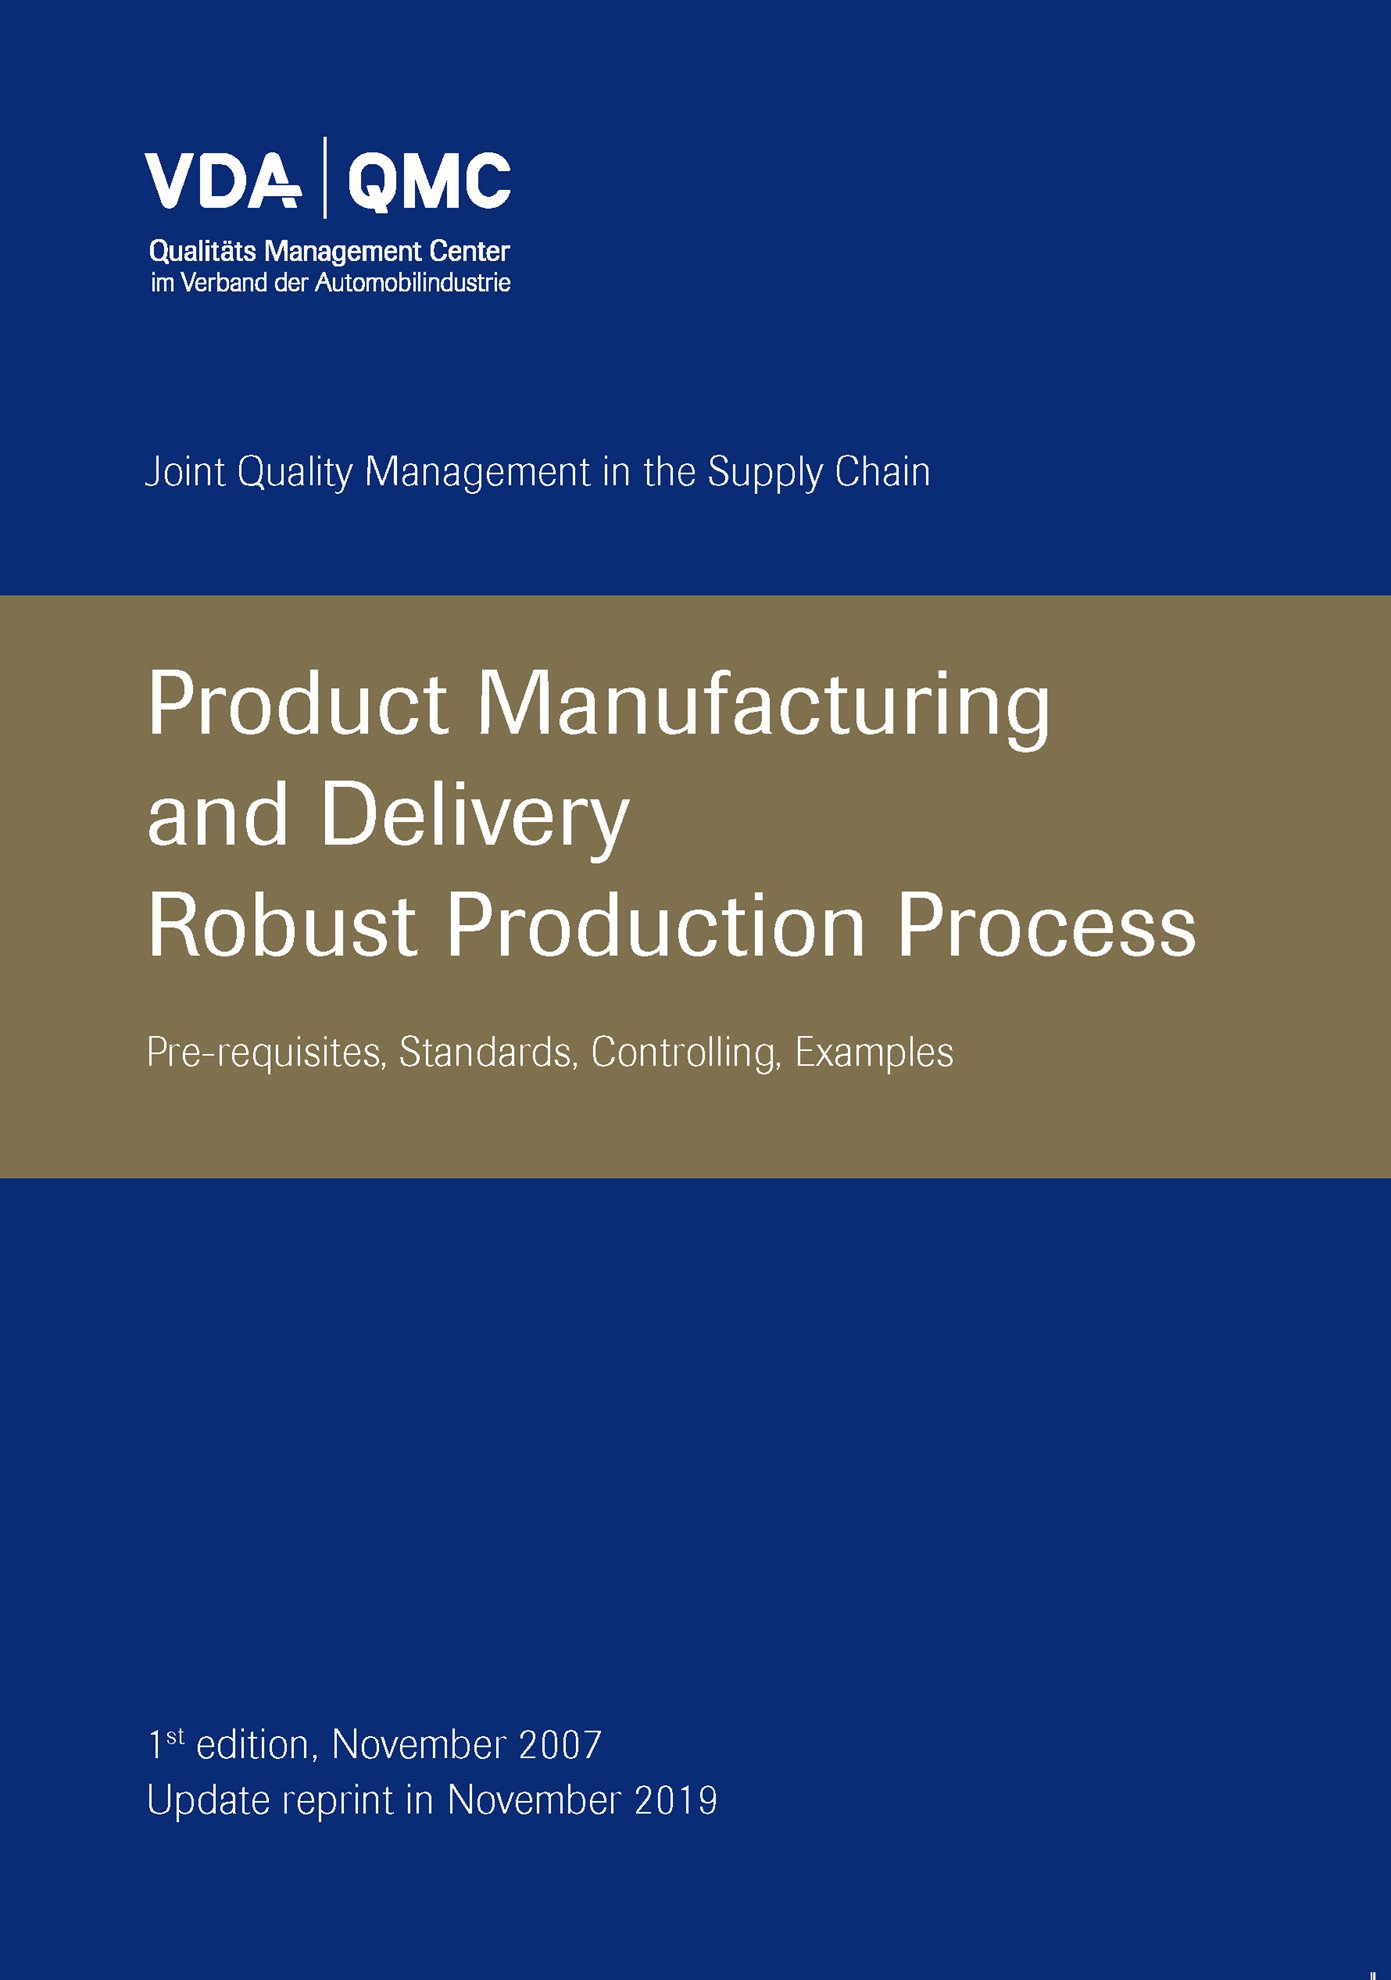 Publications  VDA Product Manufacturing and Delivery
 · Robust Production Process
 Prerequisites, Standards, Controlling, Examples
 1st edition November 2007 - Updated reprint, November 2019 1.11.2019 preview